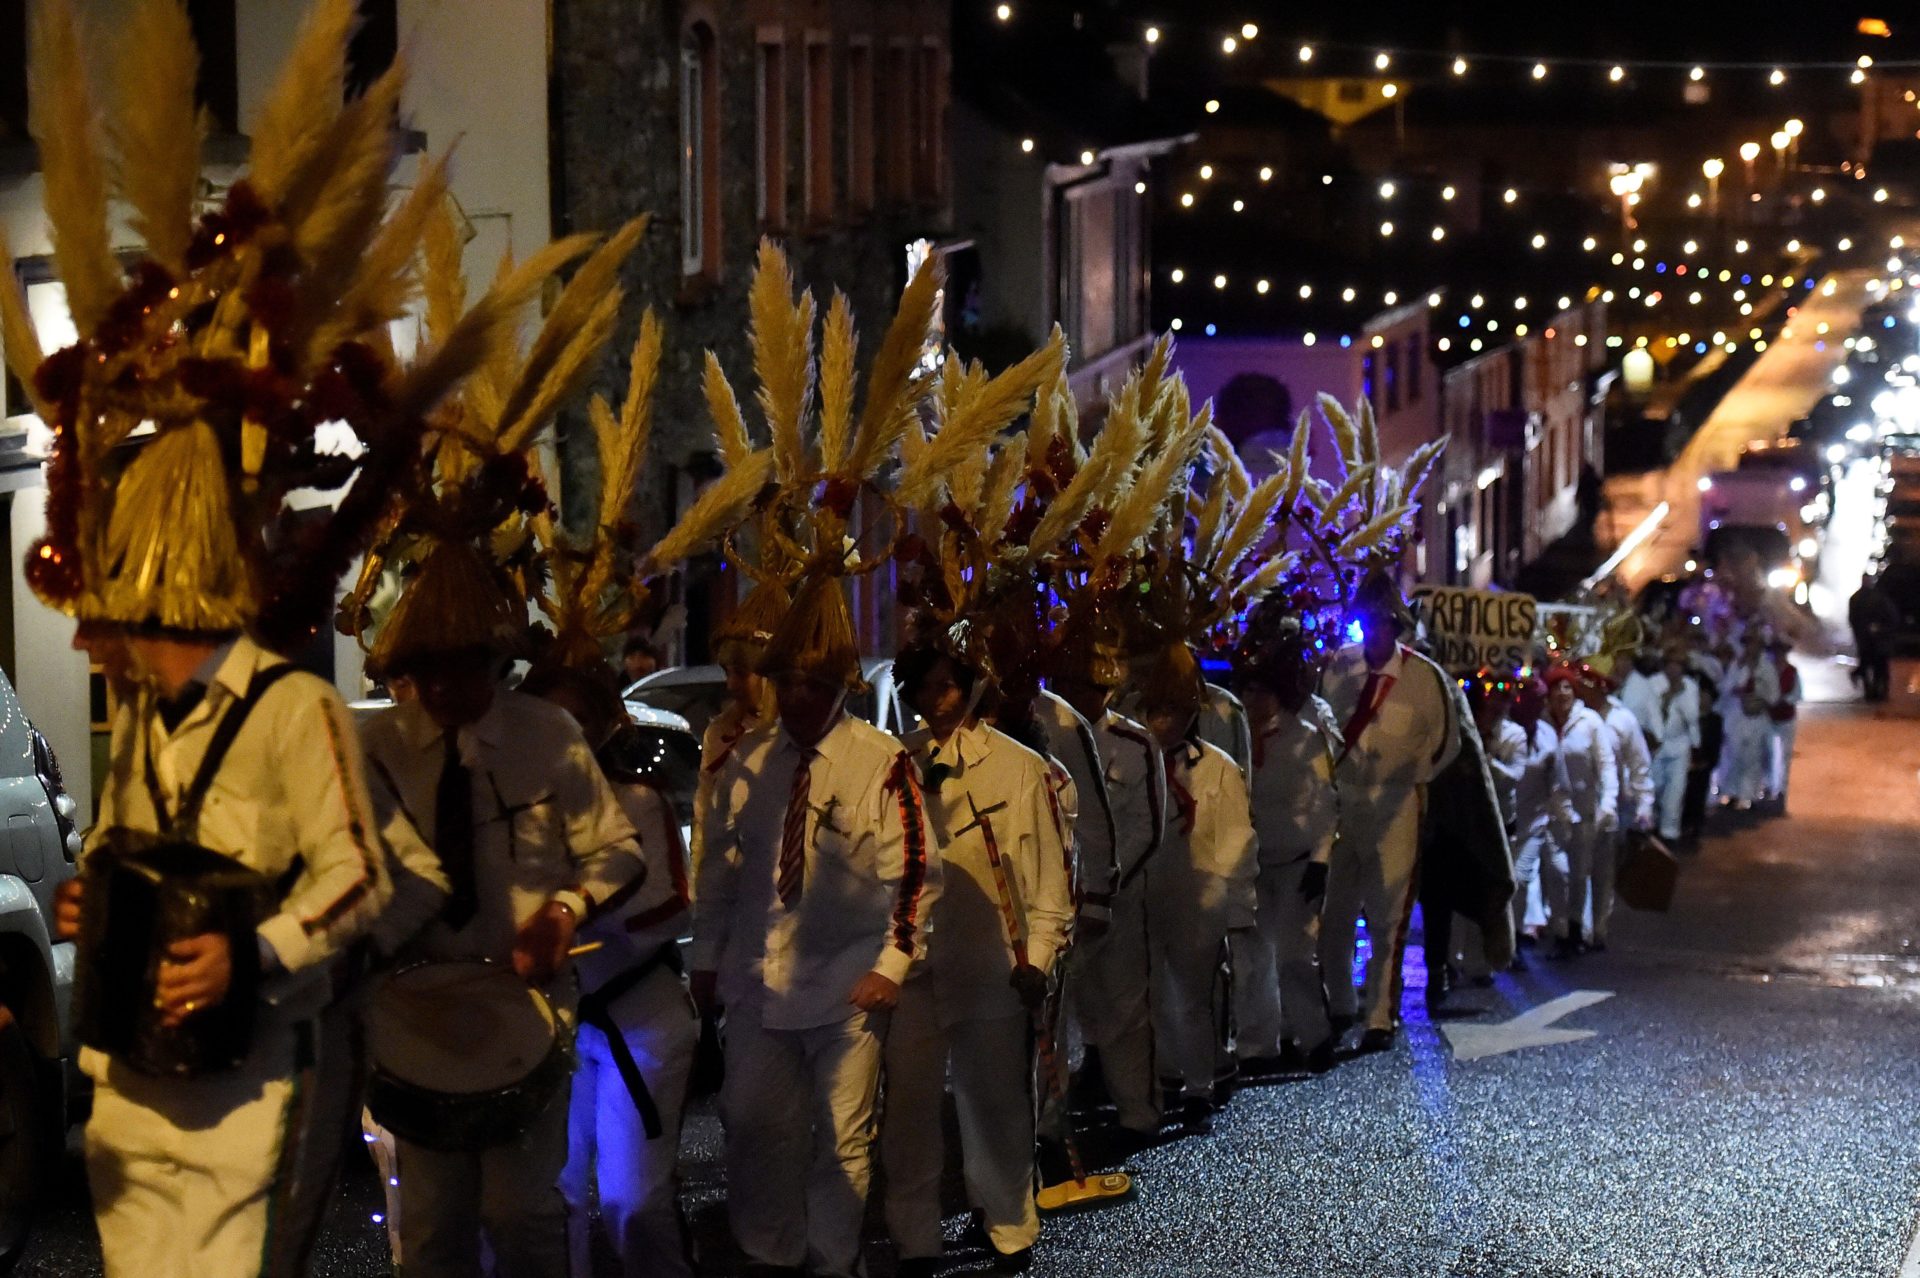 Biddy's groups parade through the streets to celebrate the Celtic festival of Imbolc, in Killorglin, Ireland.